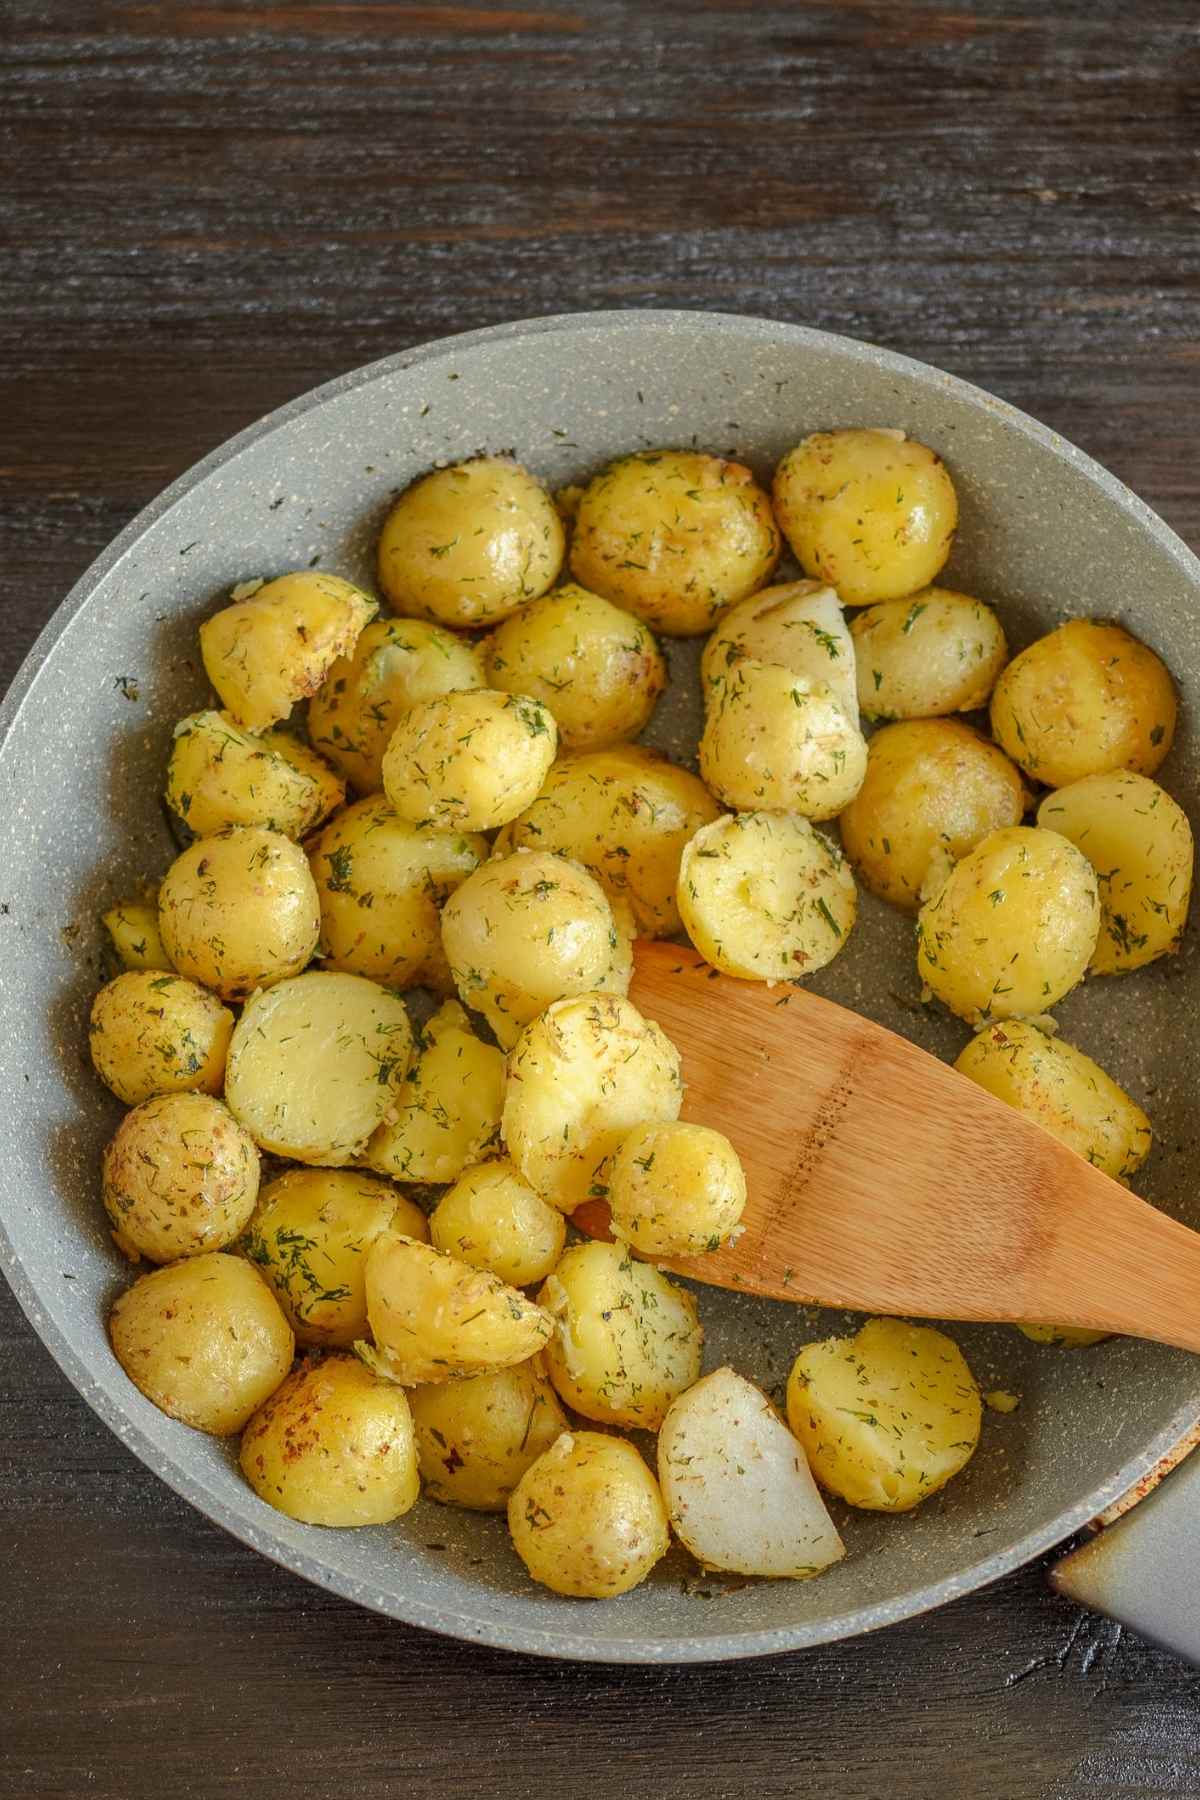 This Canned Potatoes recipe is just what you need when you’re short on time. It comes together quickly with basic seasonings and a pinch of parmesan cheese for additional flavor.